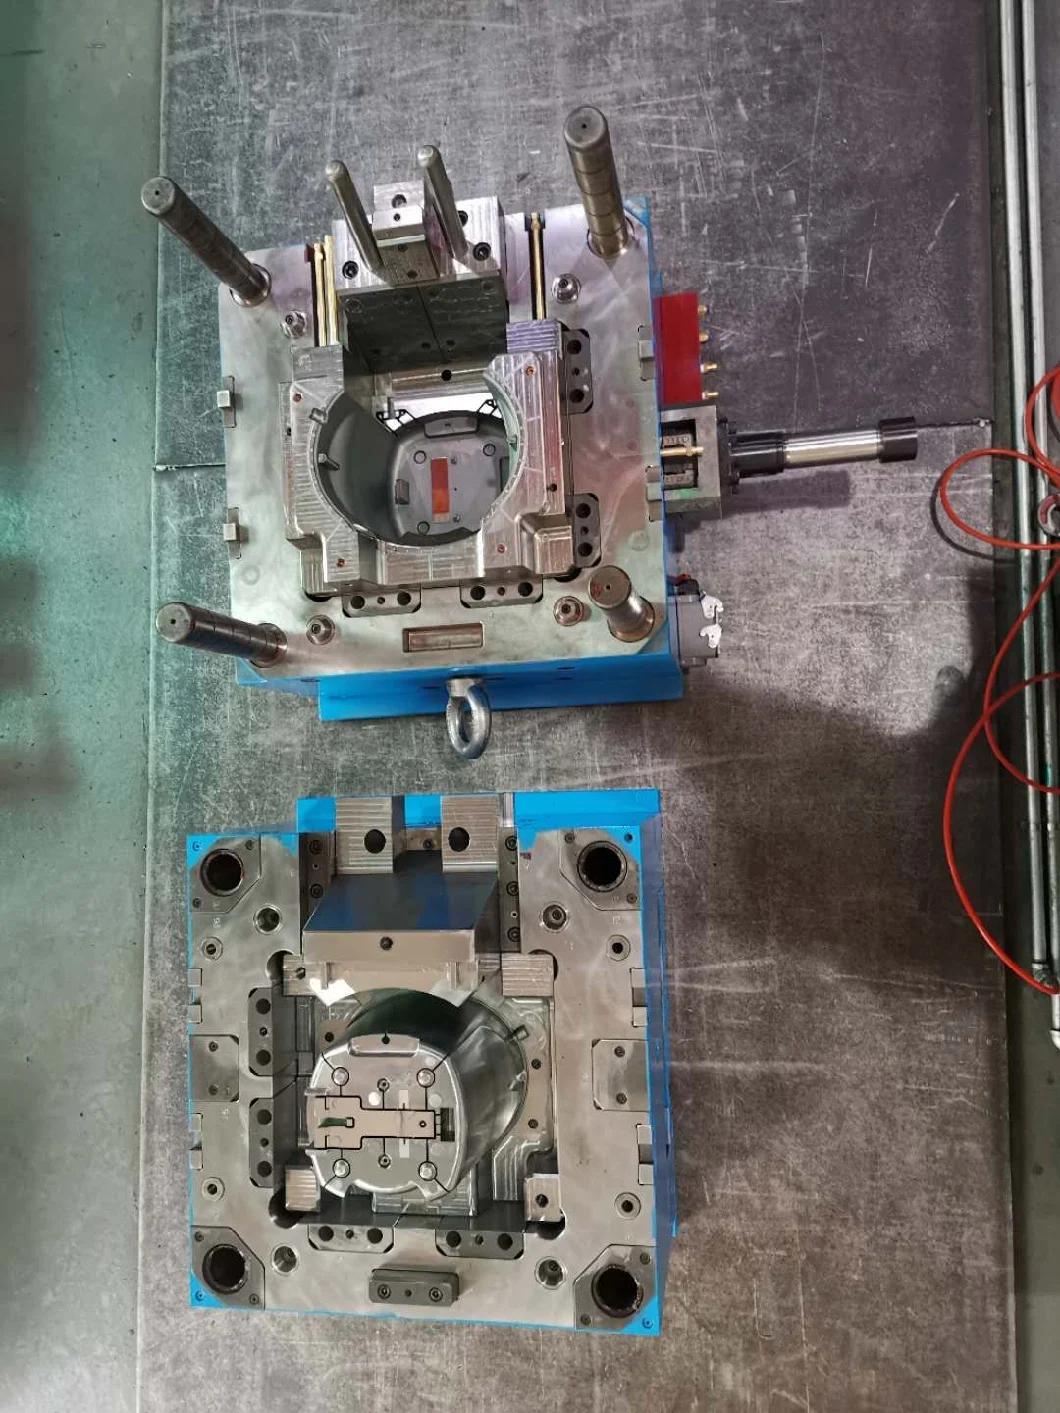 Lkm Injection Mold for Electronic Plastic Shell Parts